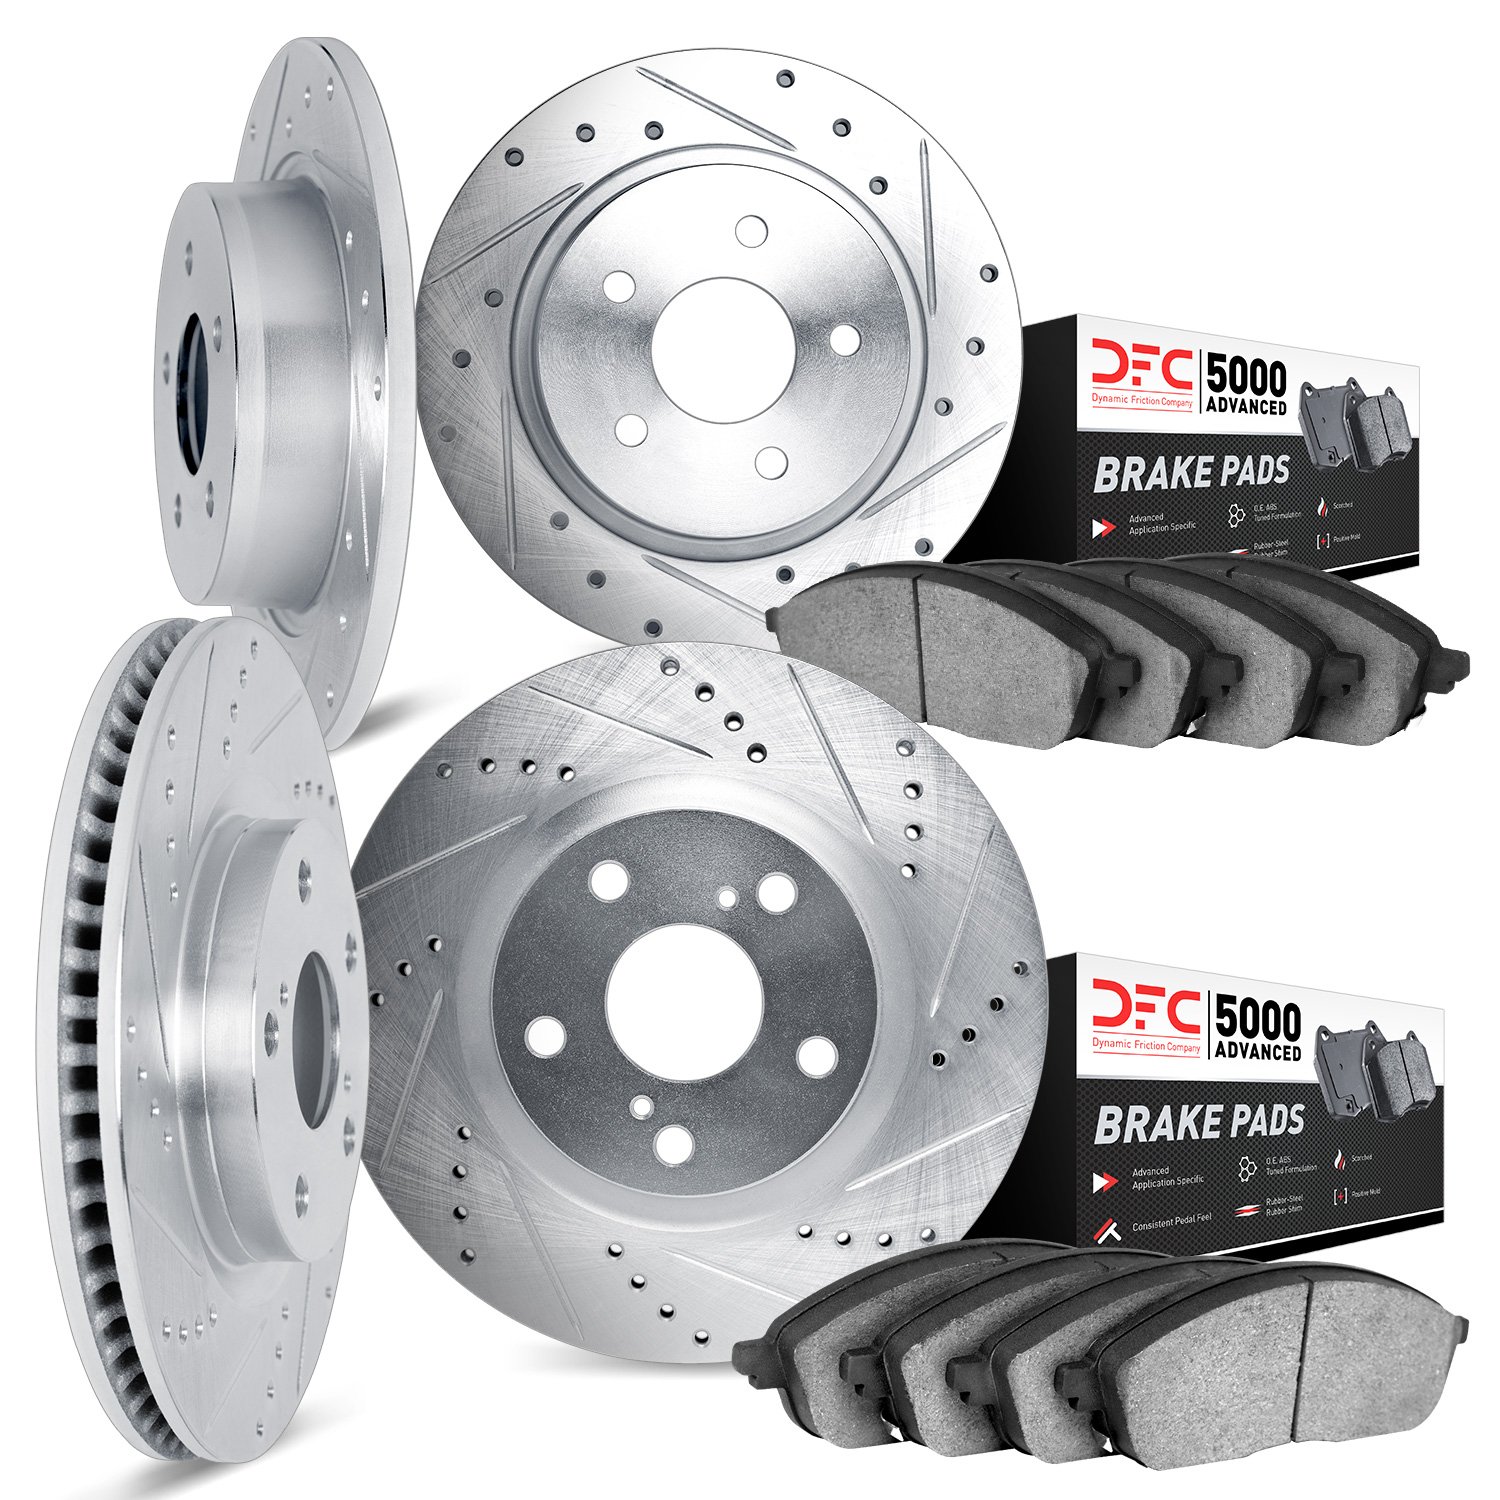 7504-76135 Drilled/Slotted Brake Rotors w/5000 Advanced Brake Pads Kit [Silver], 2000-2004 Lexus/Toyota/Scion, Position: Front a